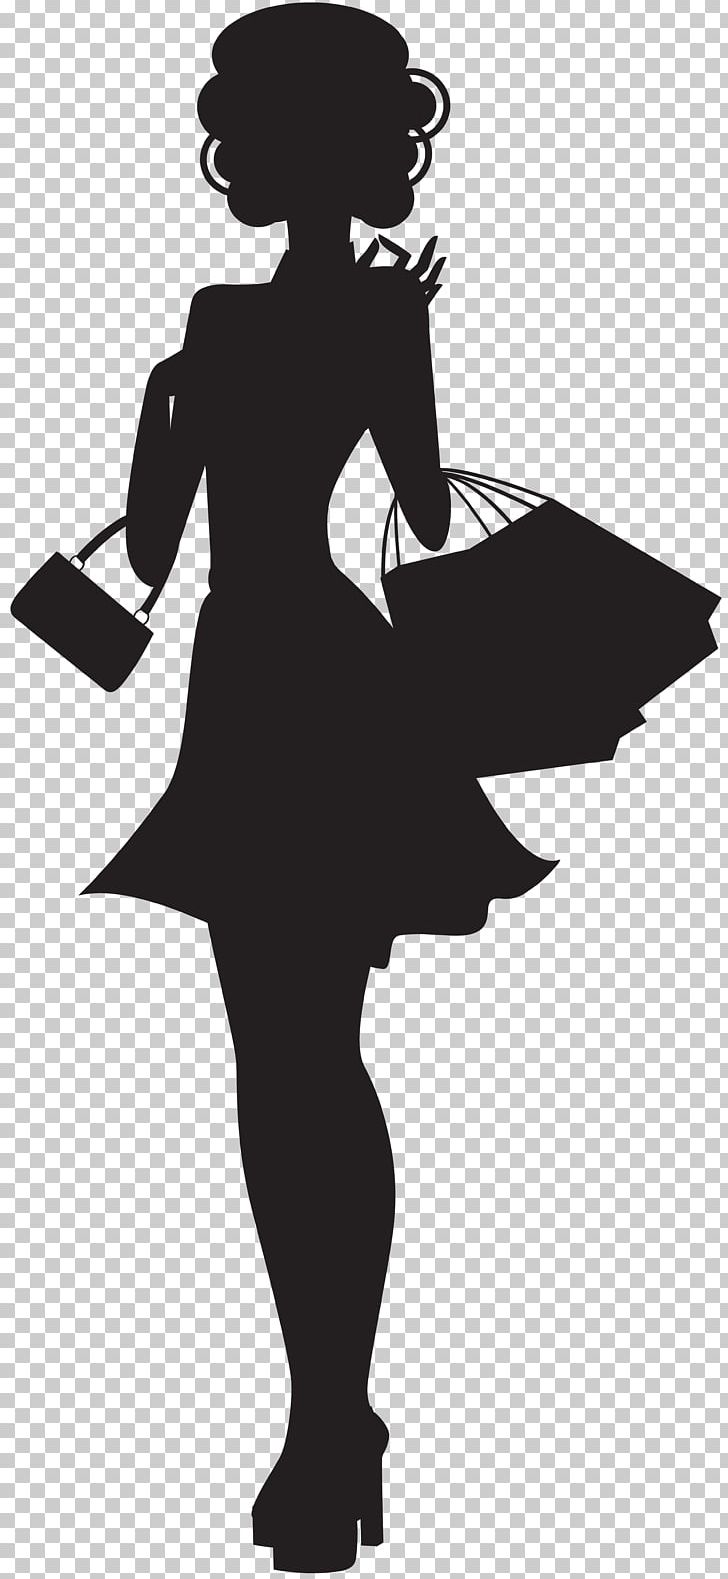 Silhouette Woman PNG, Clipart, Art, Black, Black And White, Clip Art, Clipart Free PNG Download